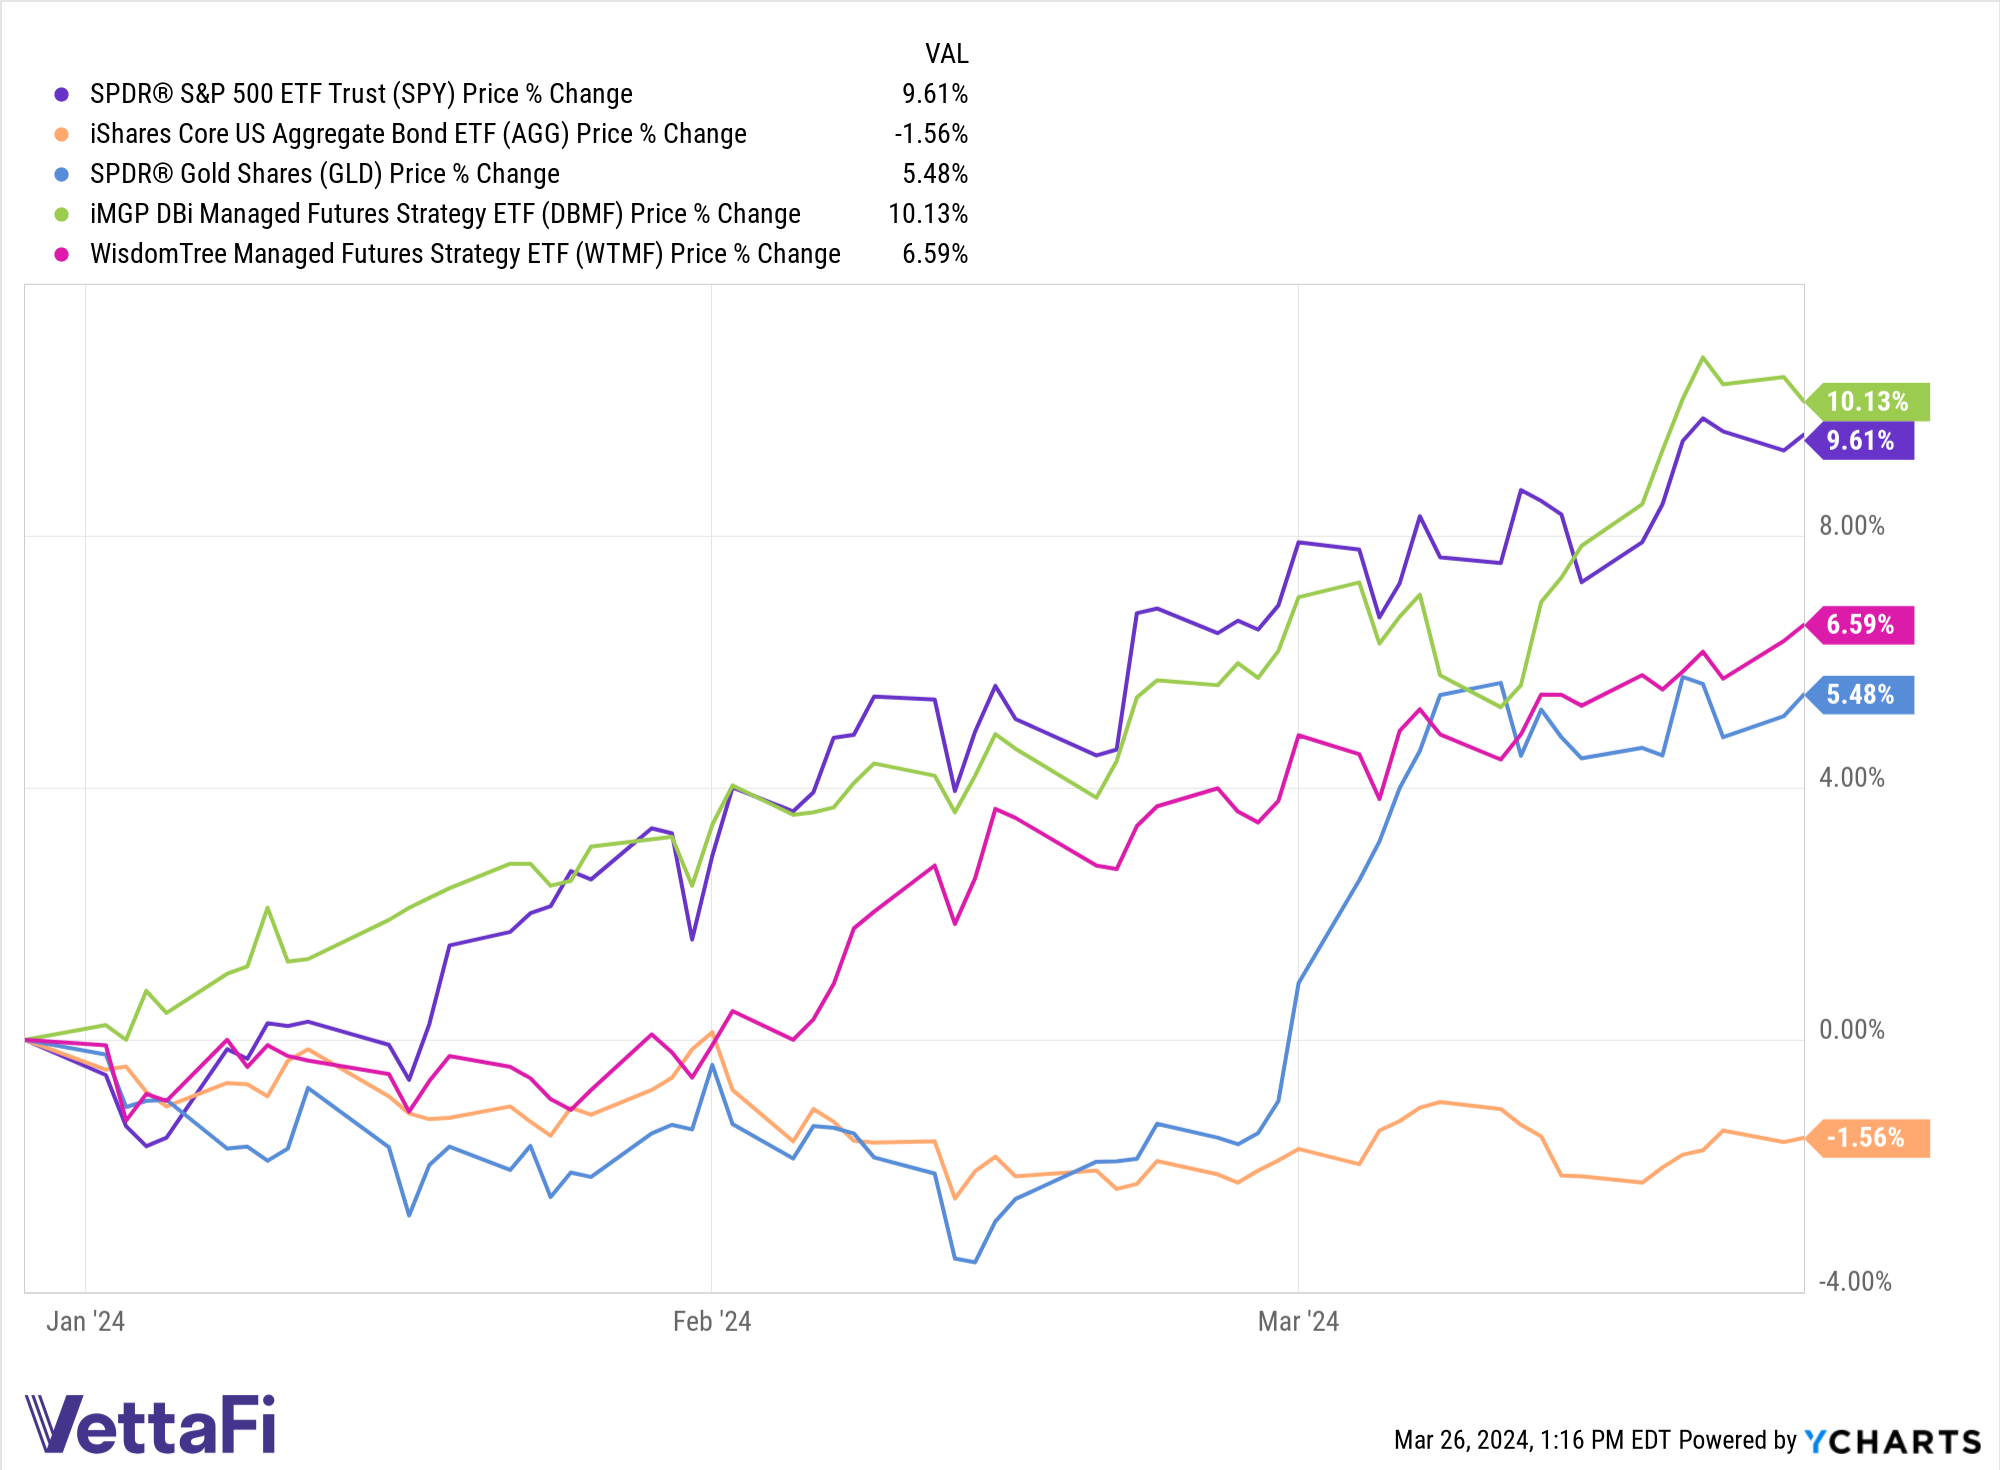 Price returns graph of SPY, AGG, GLD, DBMF, and WTMF YTD. 